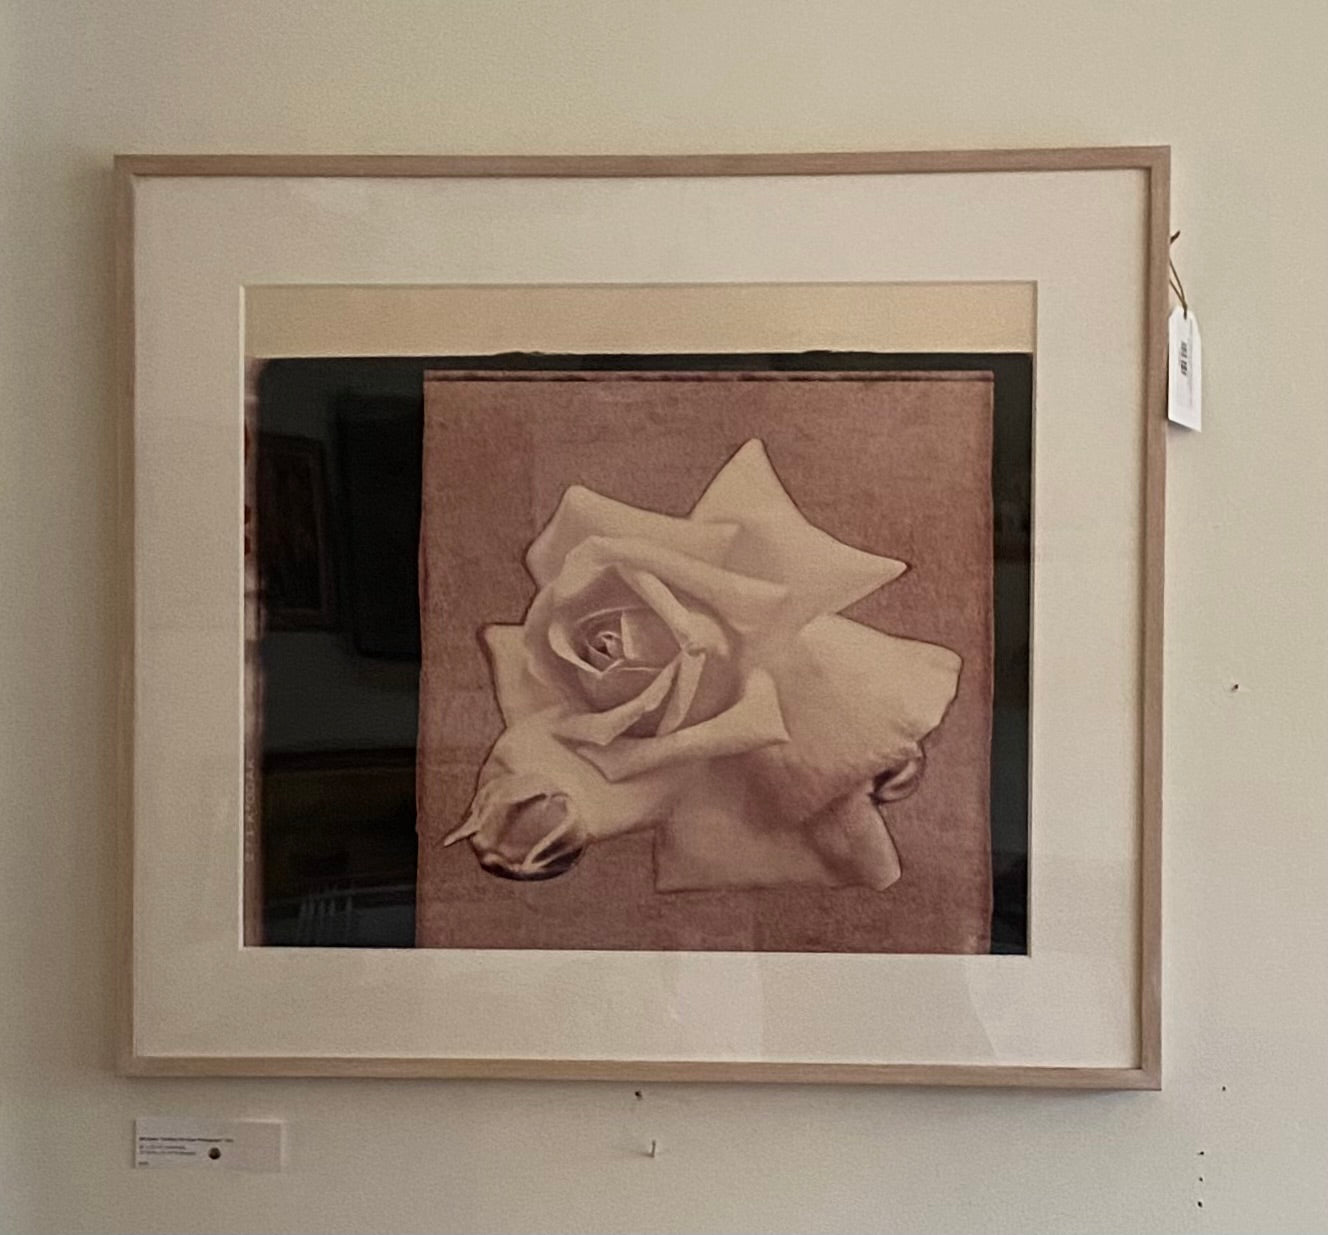 image of rose taken with a pin hole camera by William Eakin- Cook Street Vintage